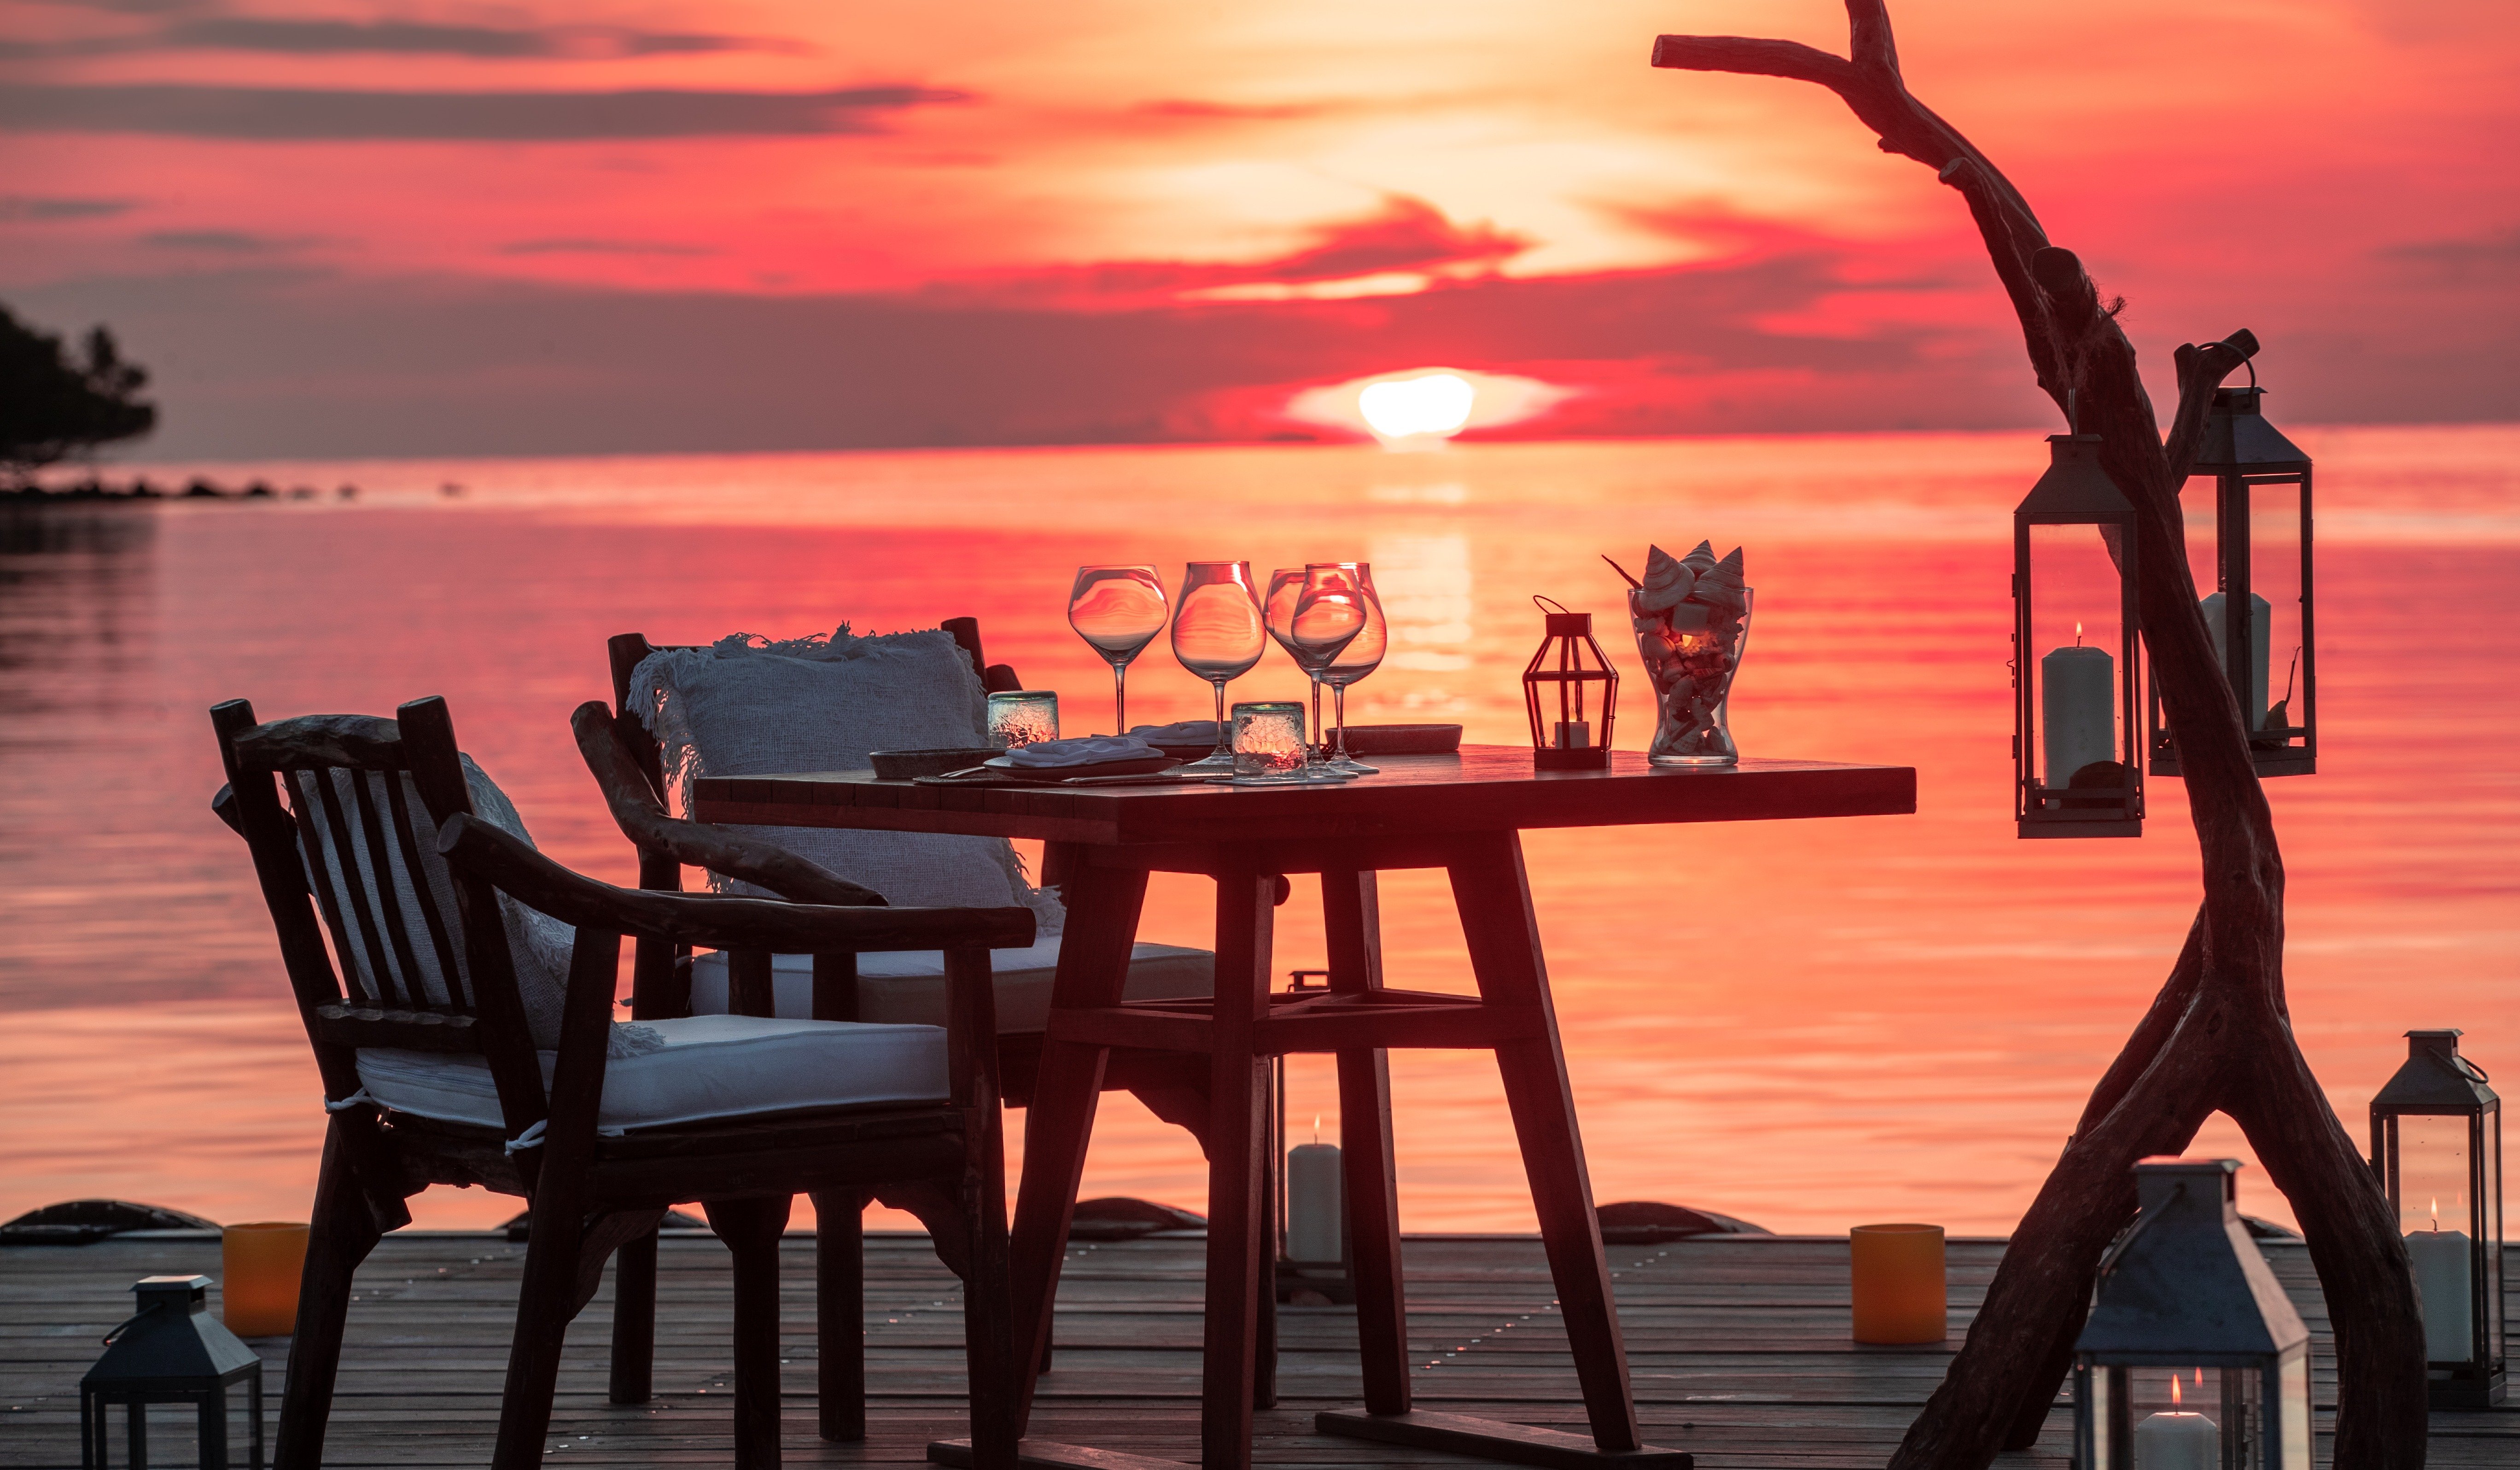 Al fresco dining jetty sunset and red skies at Bawah Reserve Indonesia